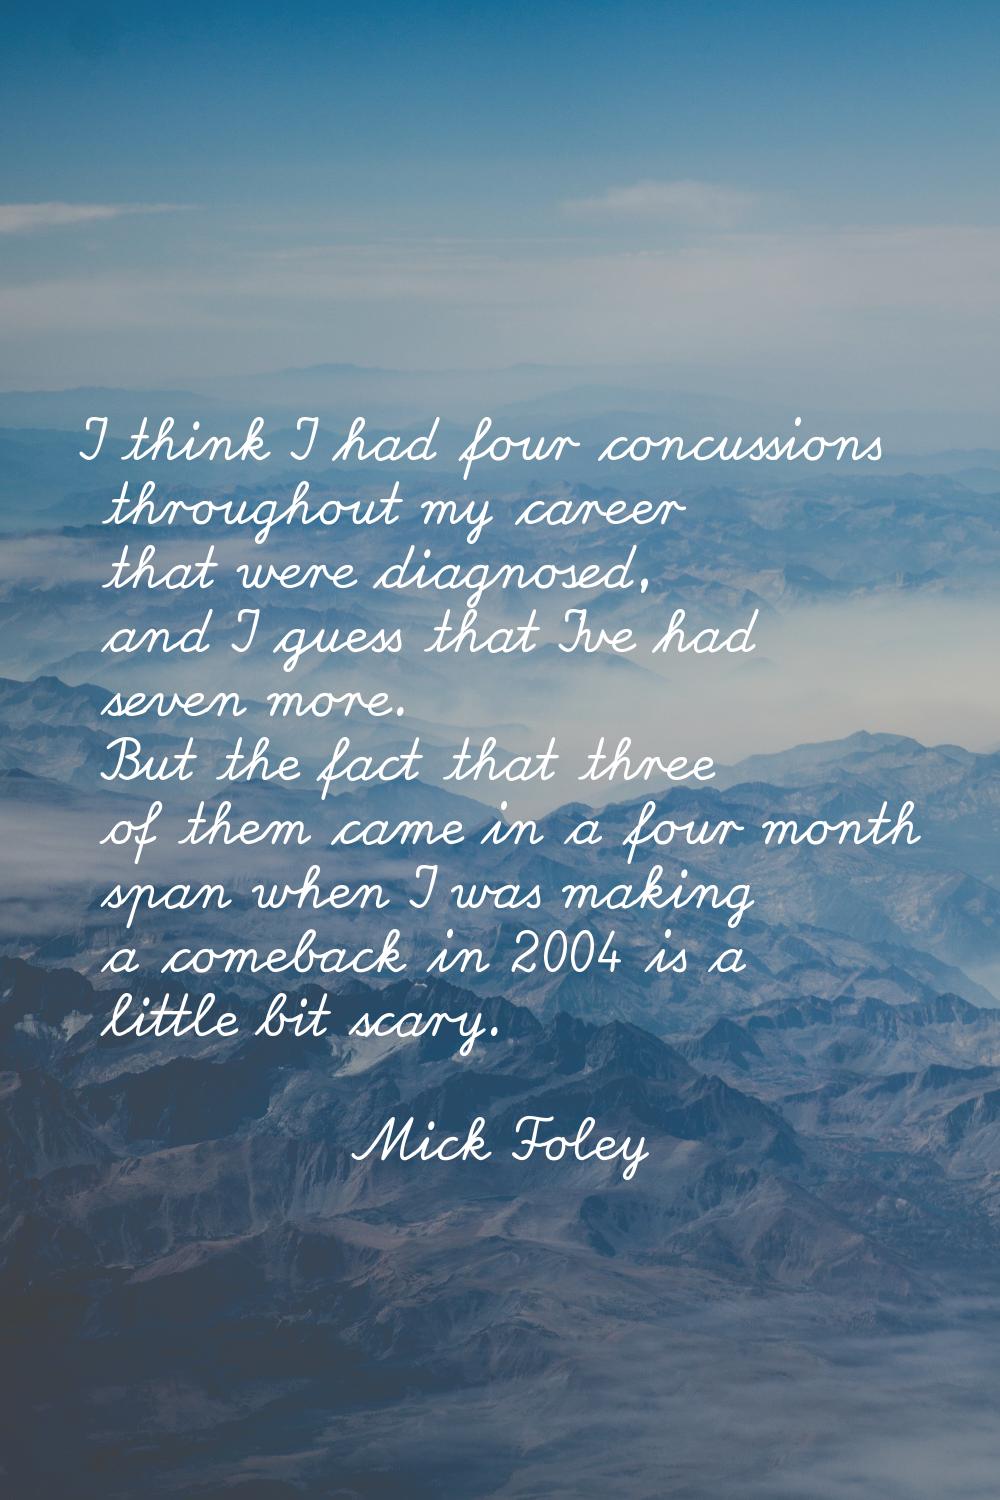 I think I had four concussions throughout my career that were diagnosed, and I guess that I've had 